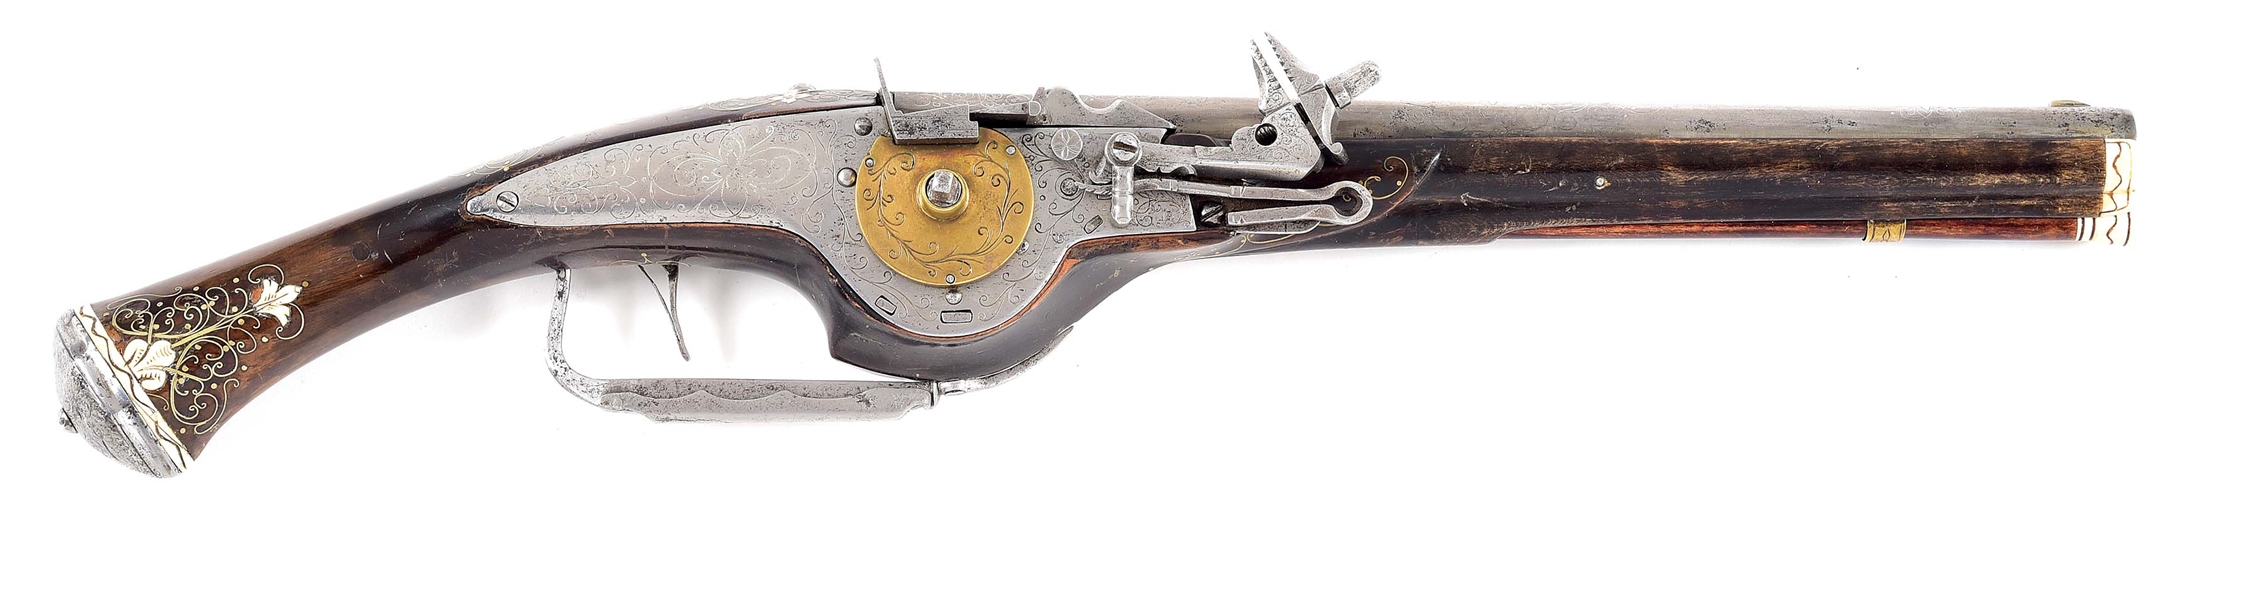 (A) A COMPOSITE GERMAN WHEELOCK PISTOL, WITH VINTAGE BARREL AND STOCK.